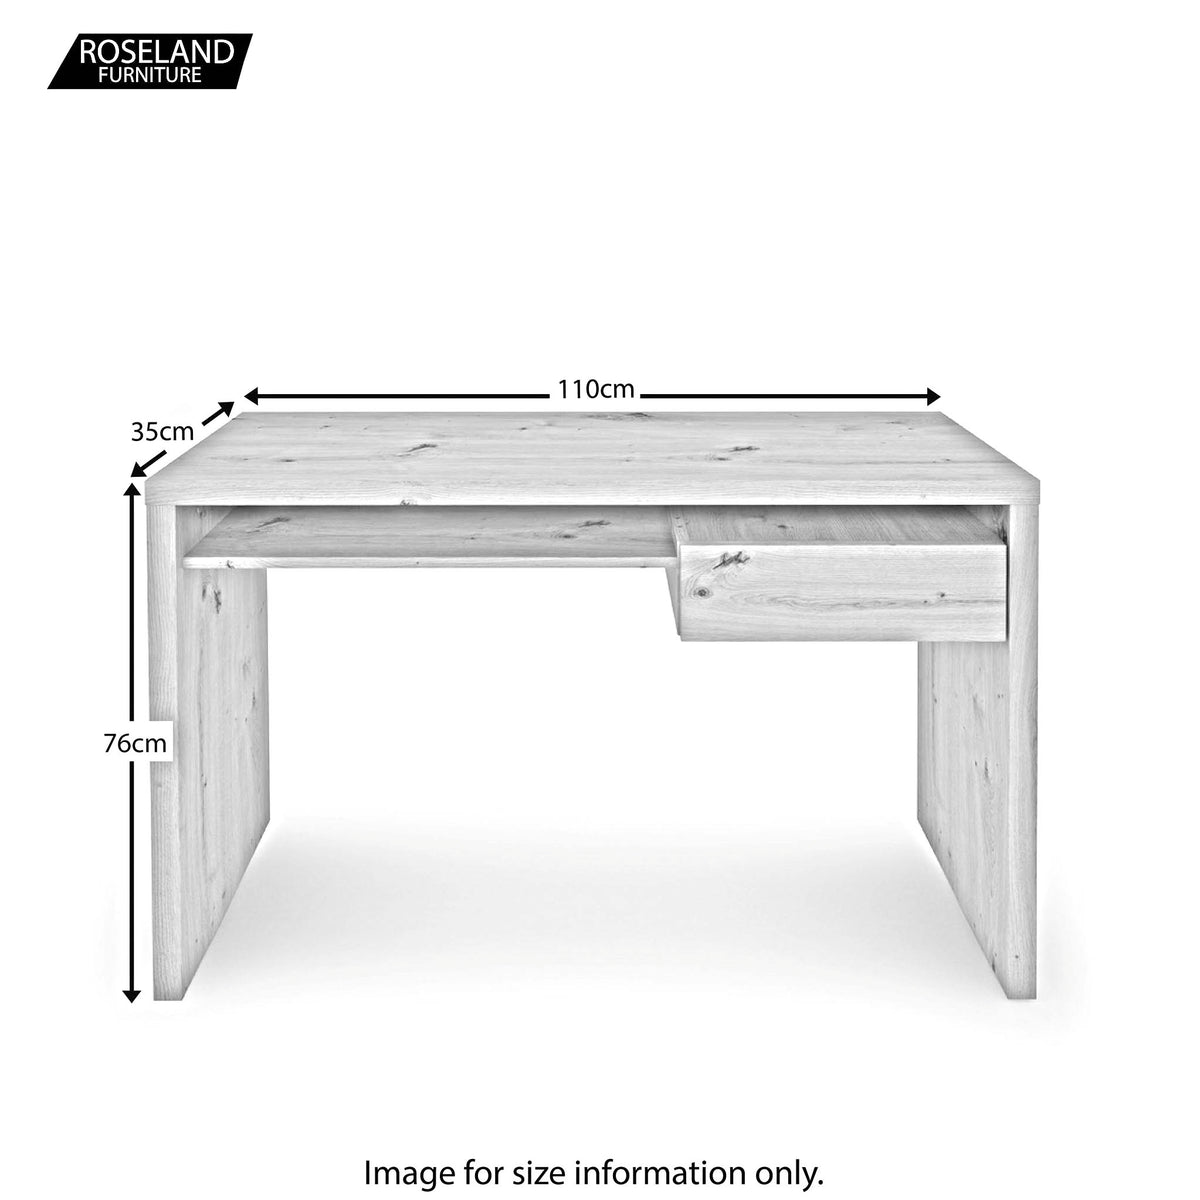 Marcus 1 Drawer Office Desk - Size Guide